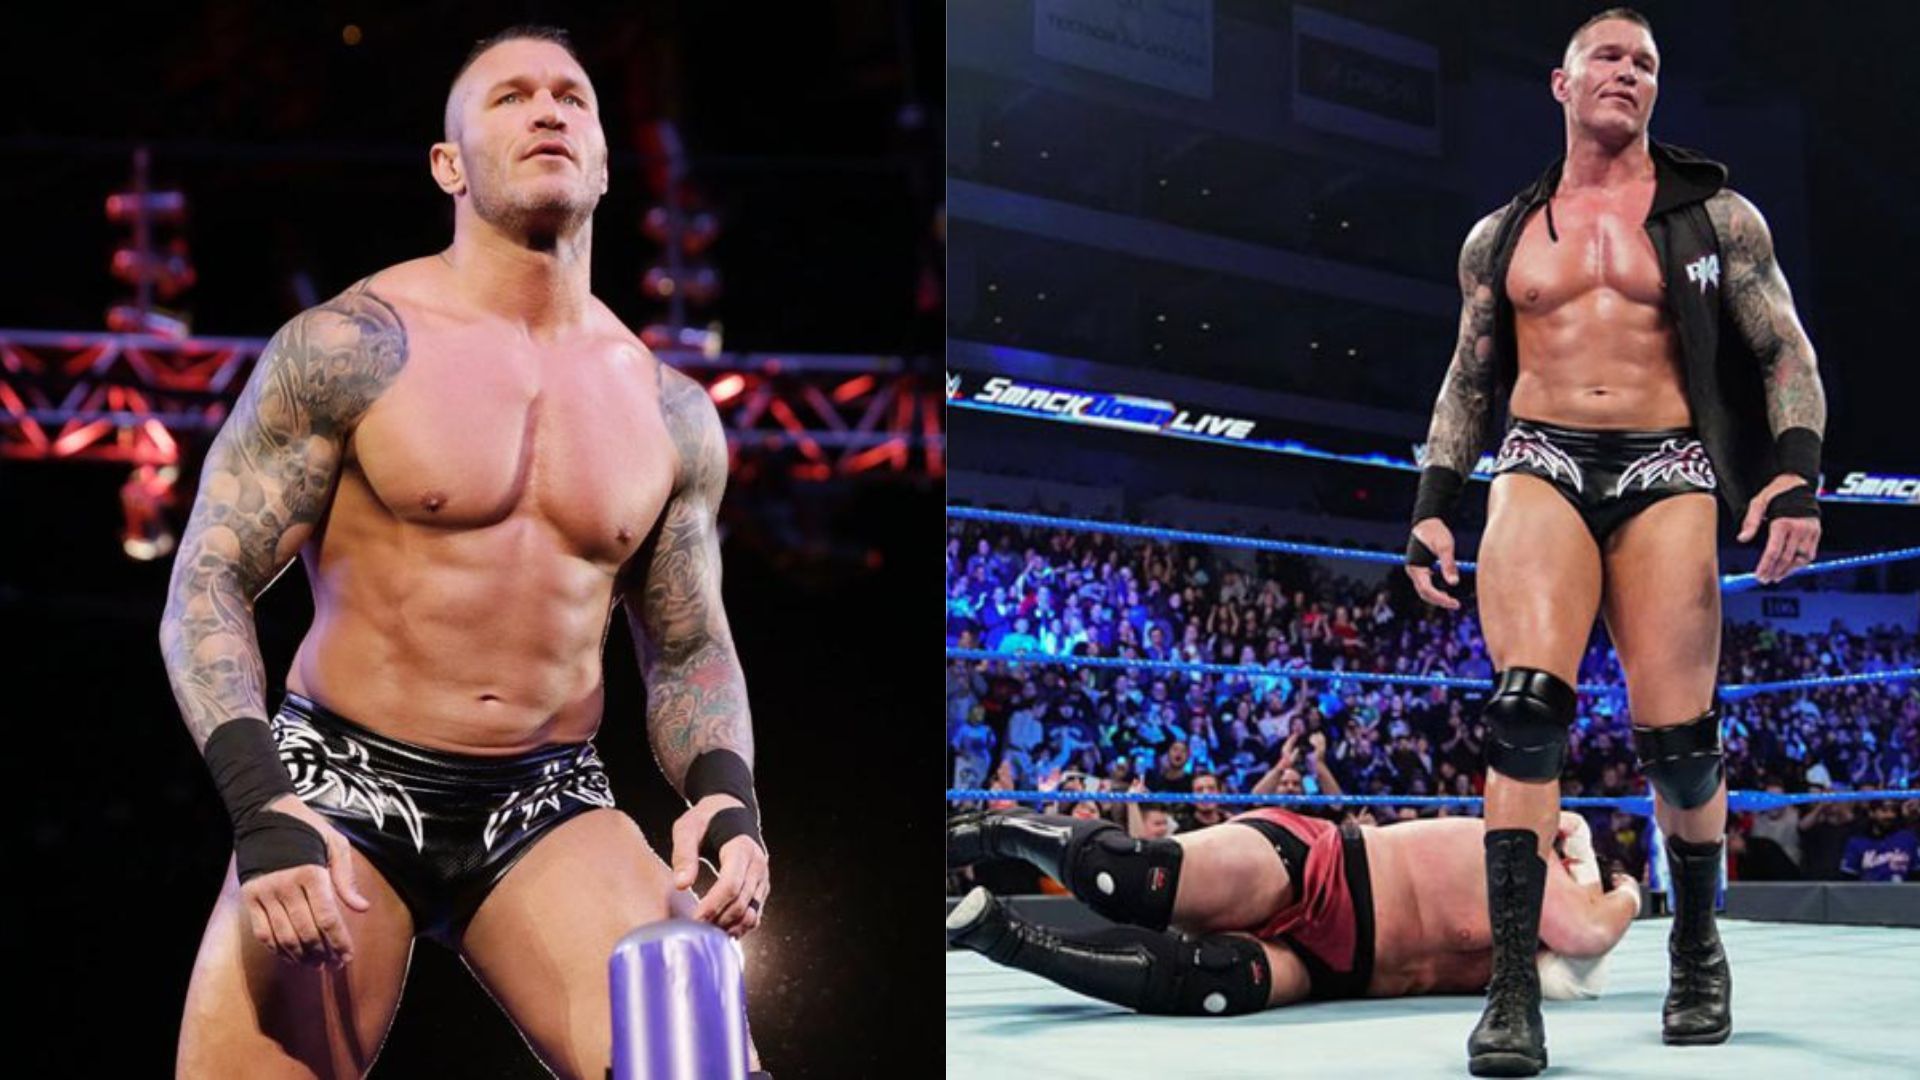 Randy Orton is rumored to appear at WWE Royal Rumble 2023